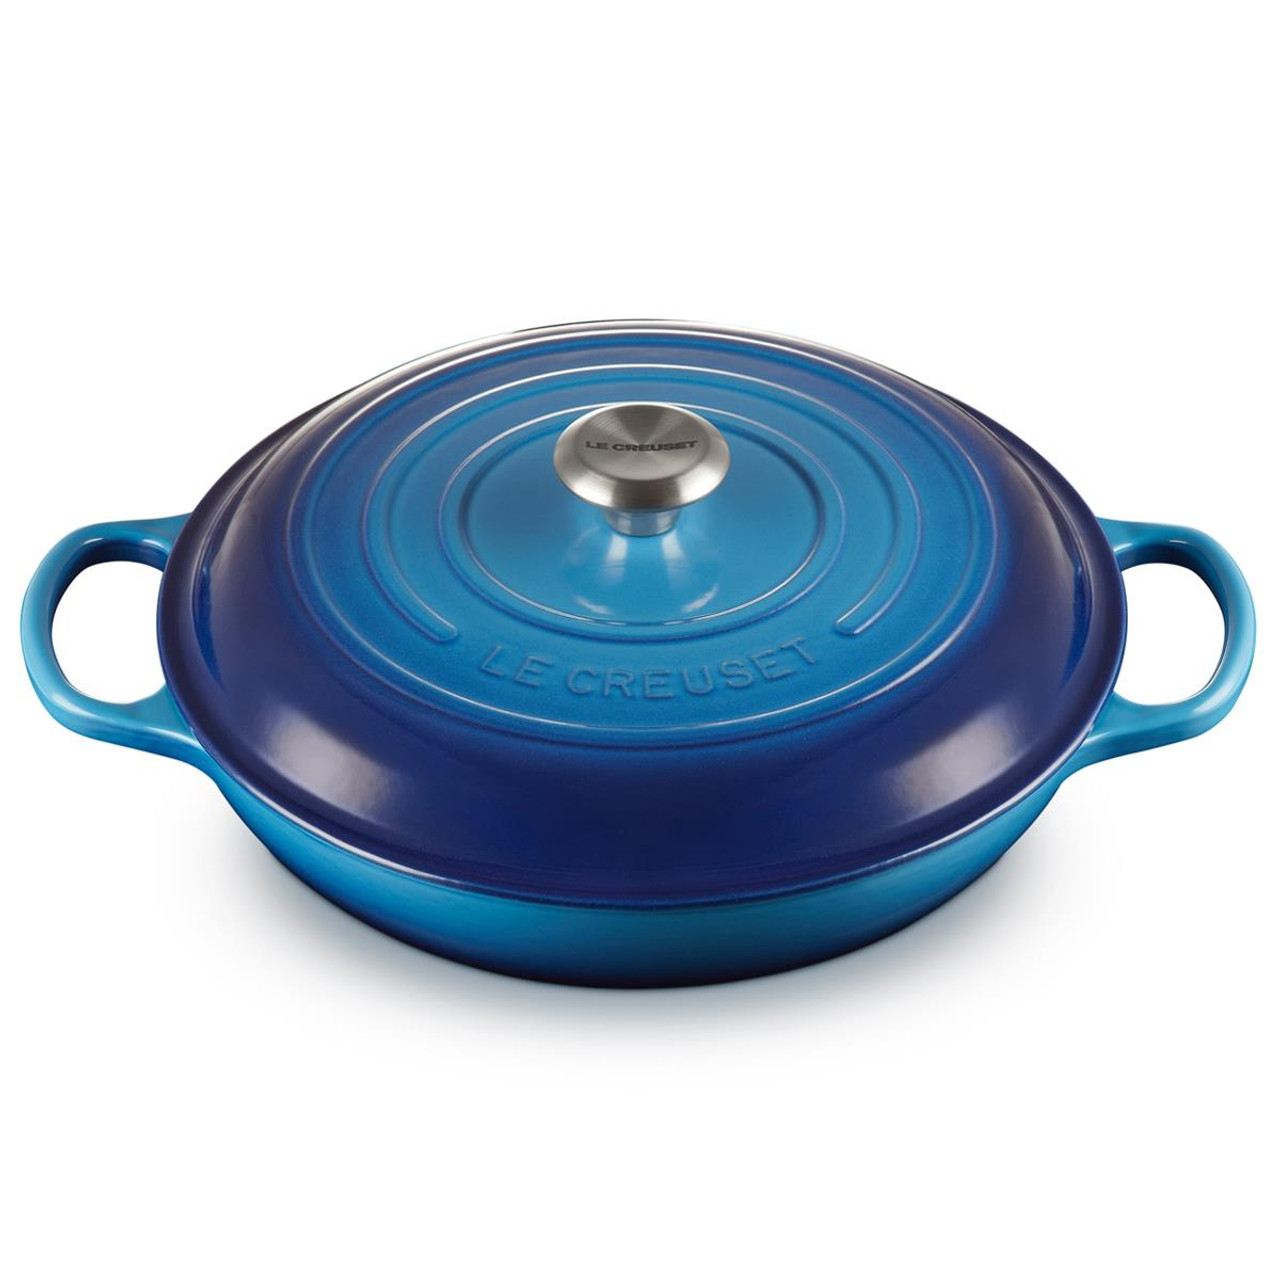 What makes Le Creuset shallow casserole dish stand out?